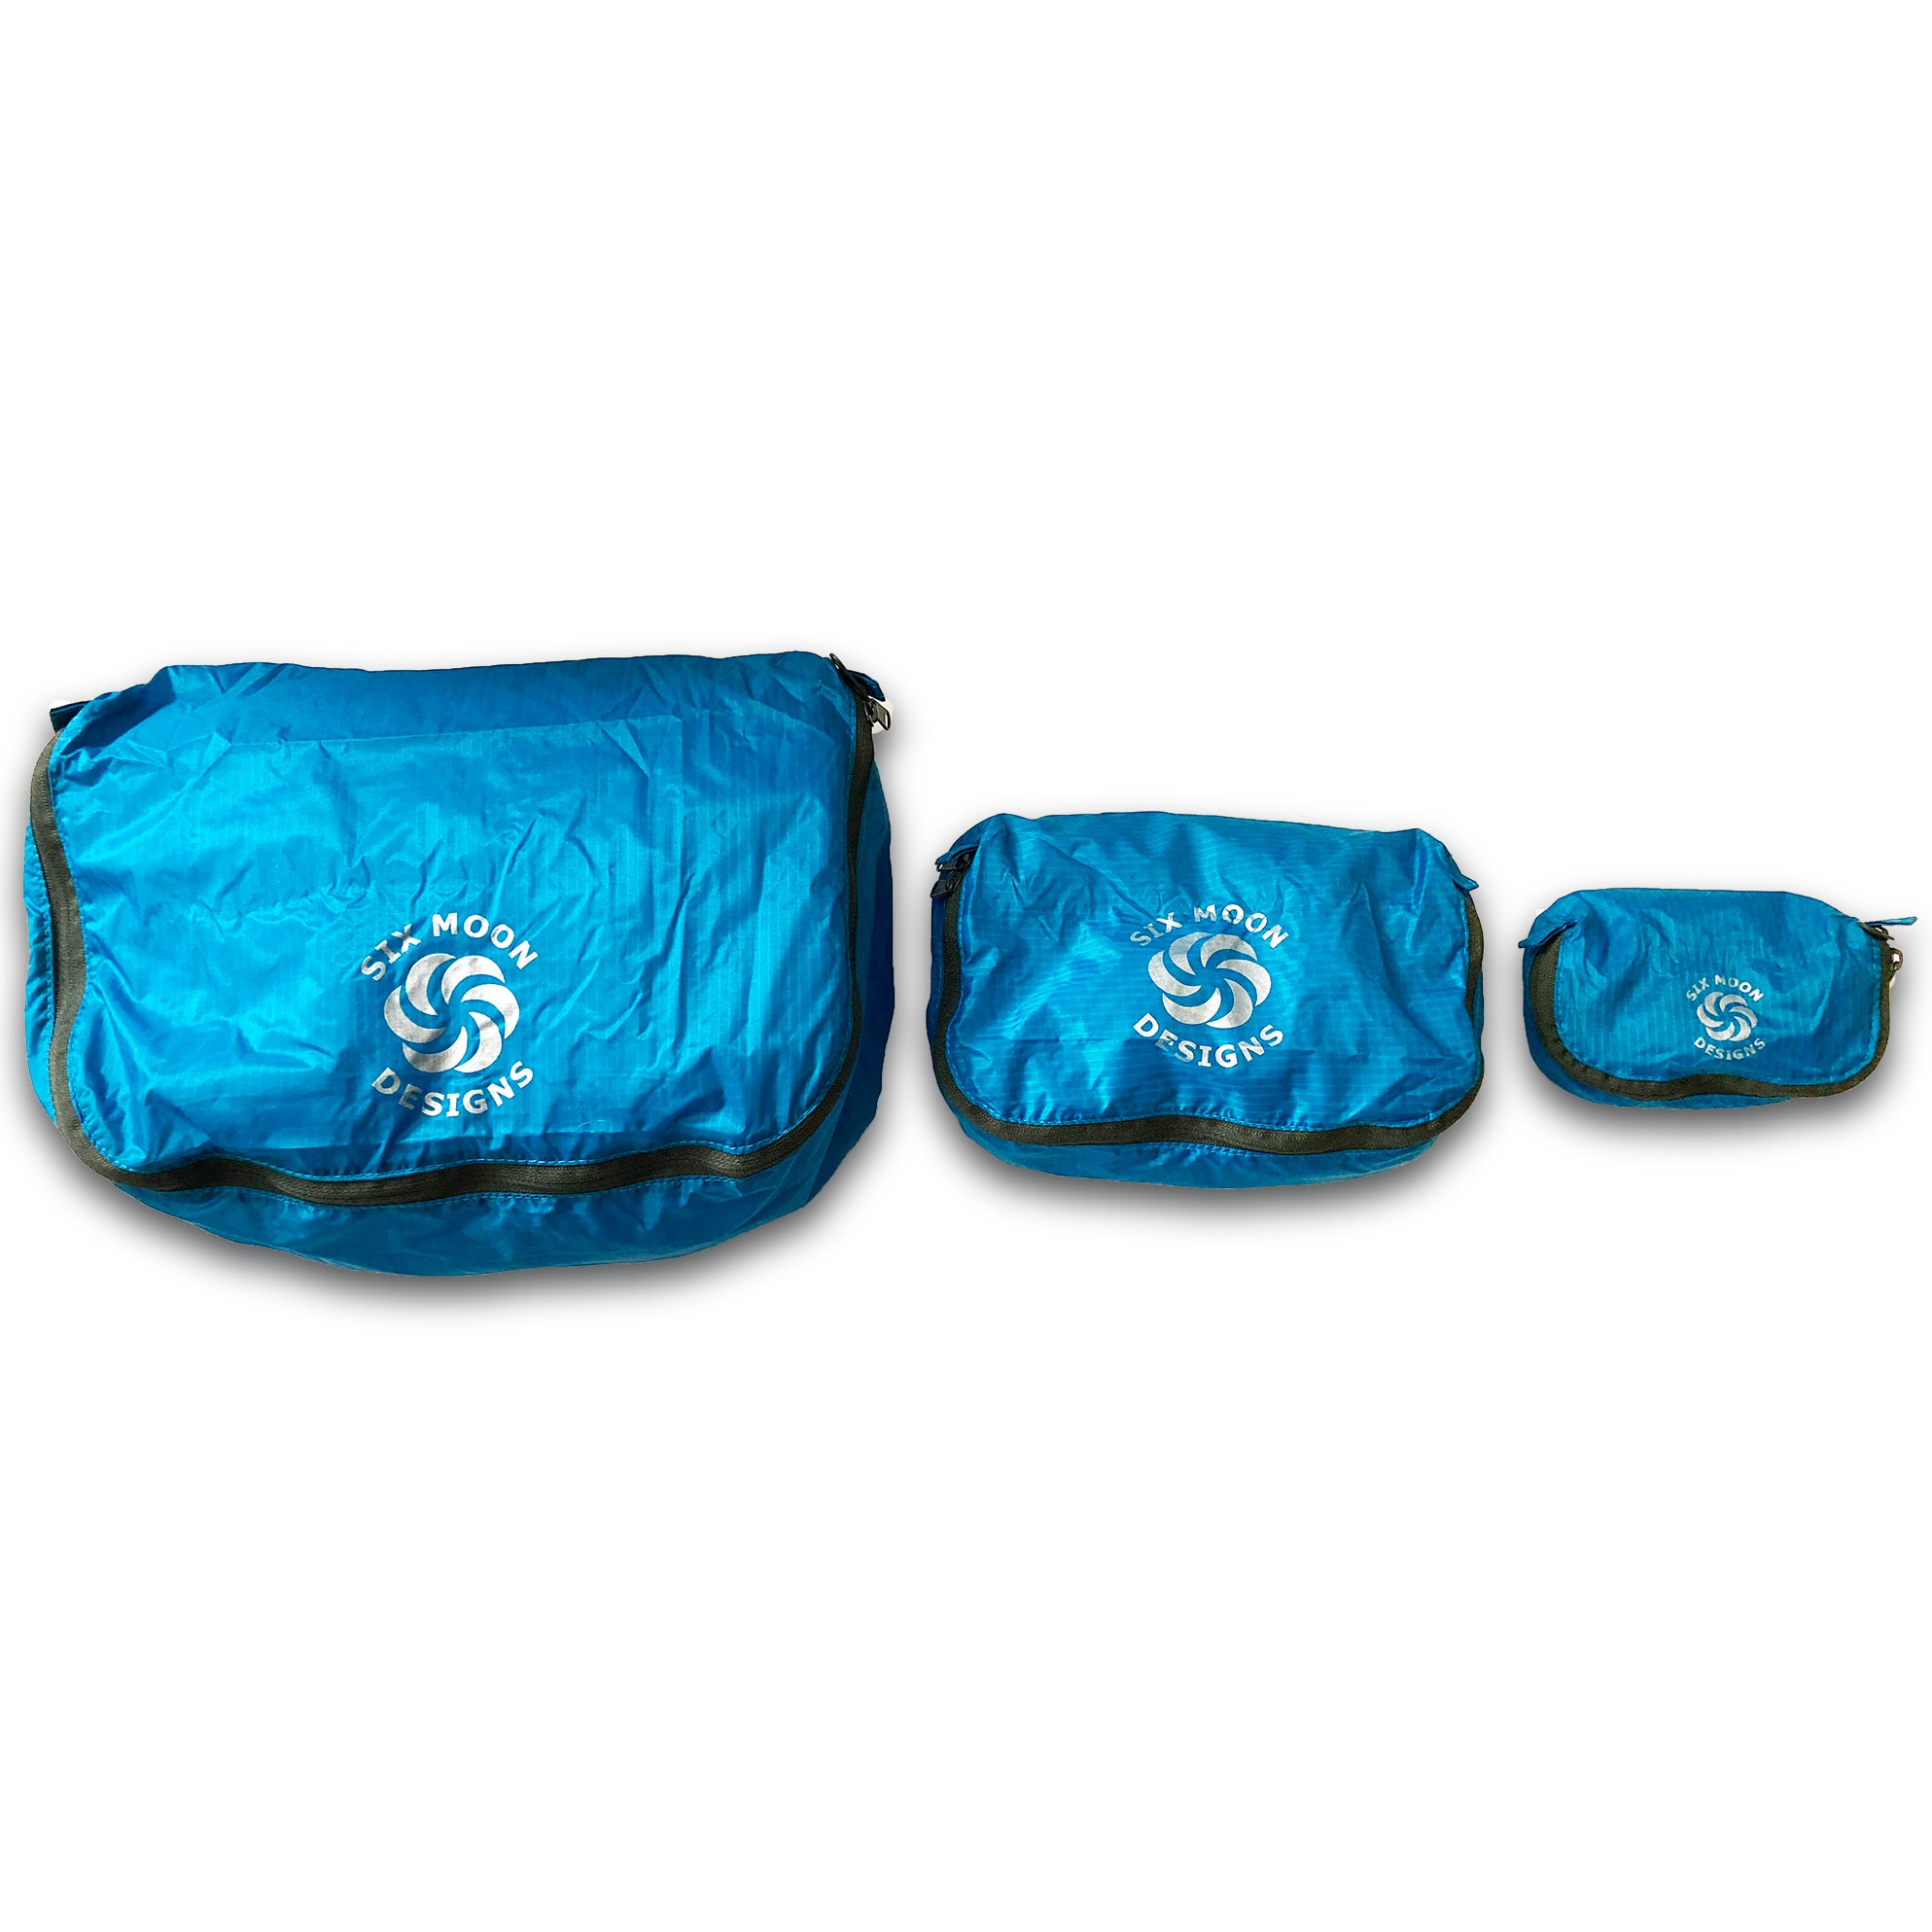 Blue Six Moon Designs Pack Pod stuff sacks in all three sizes side by side